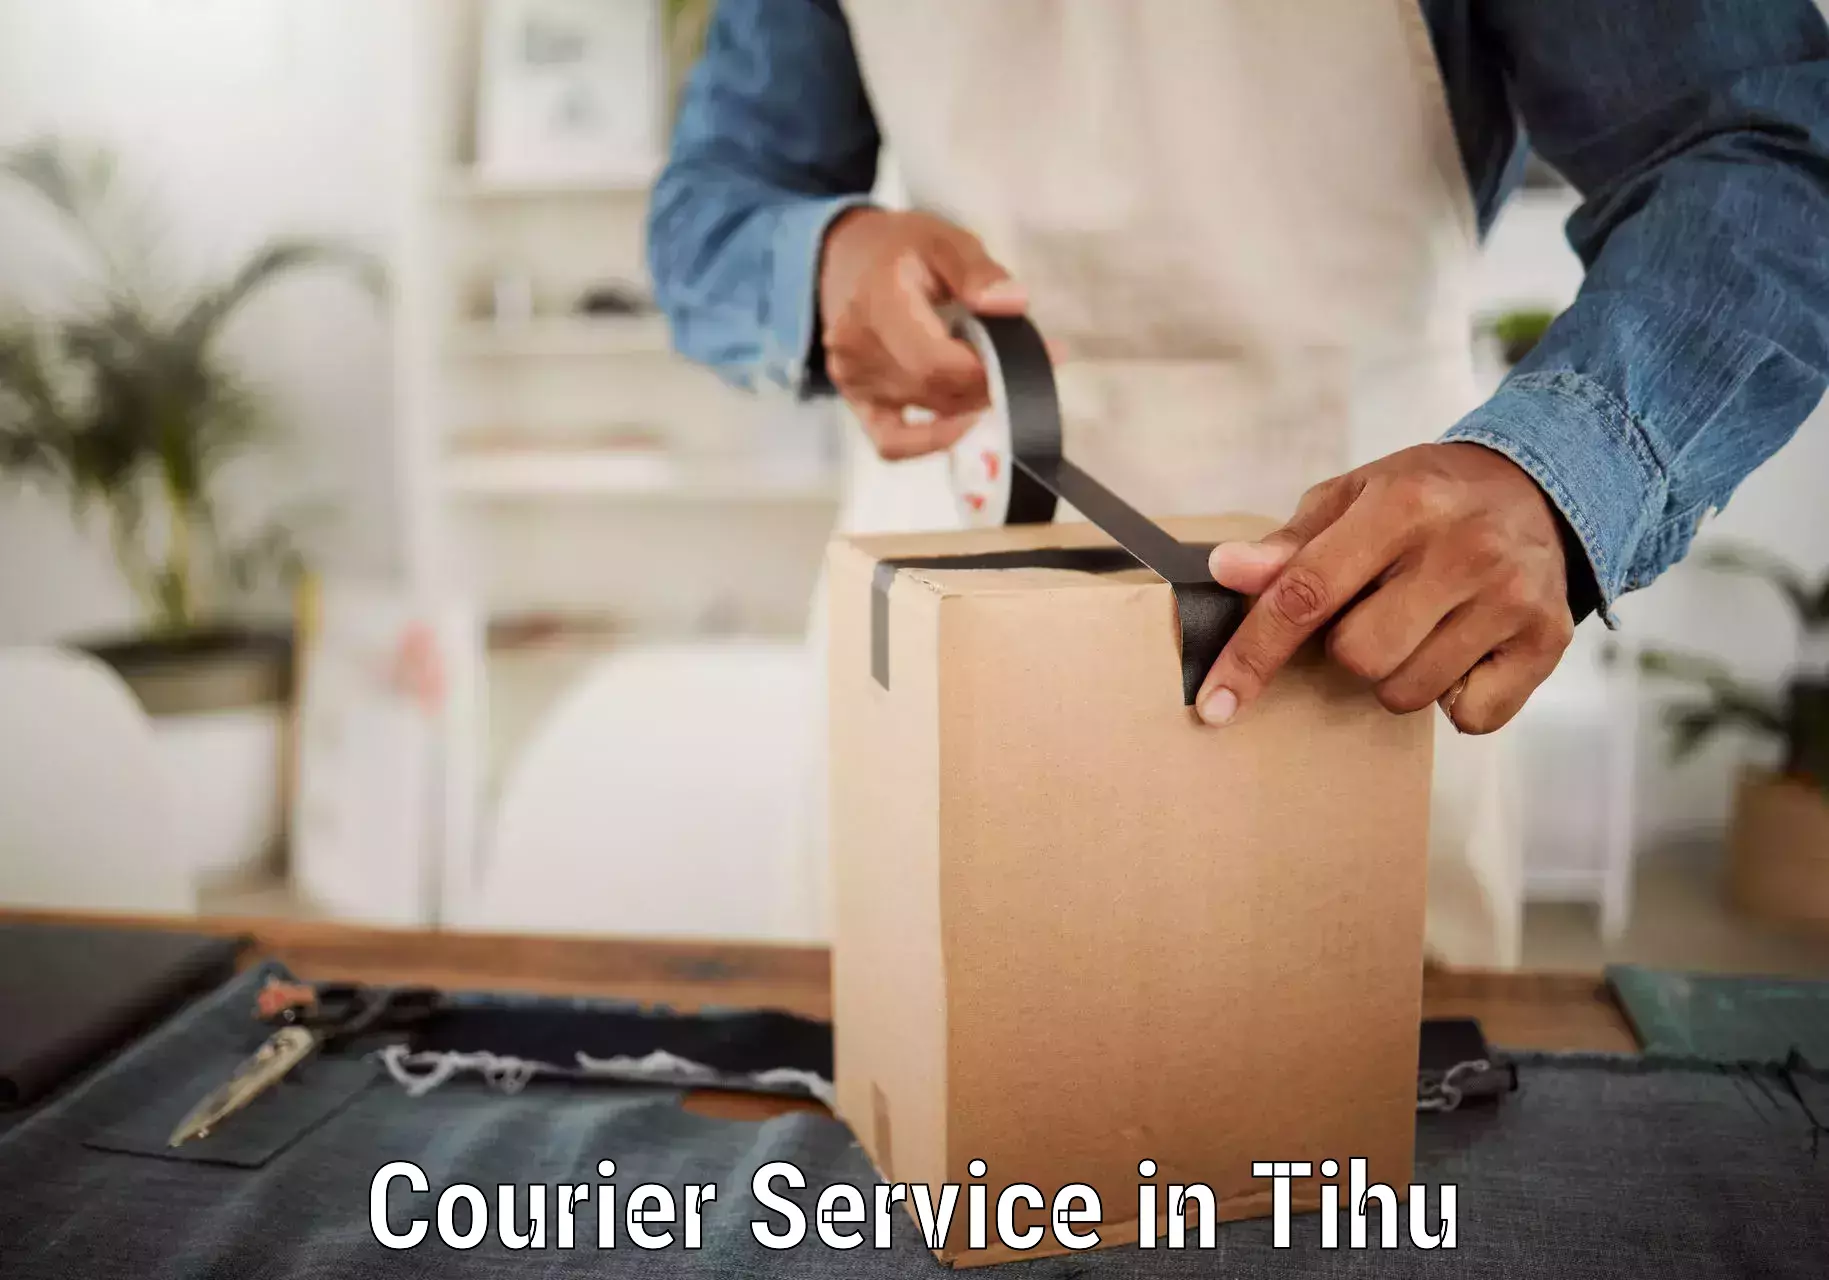 Sustainable delivery practices in Tihu